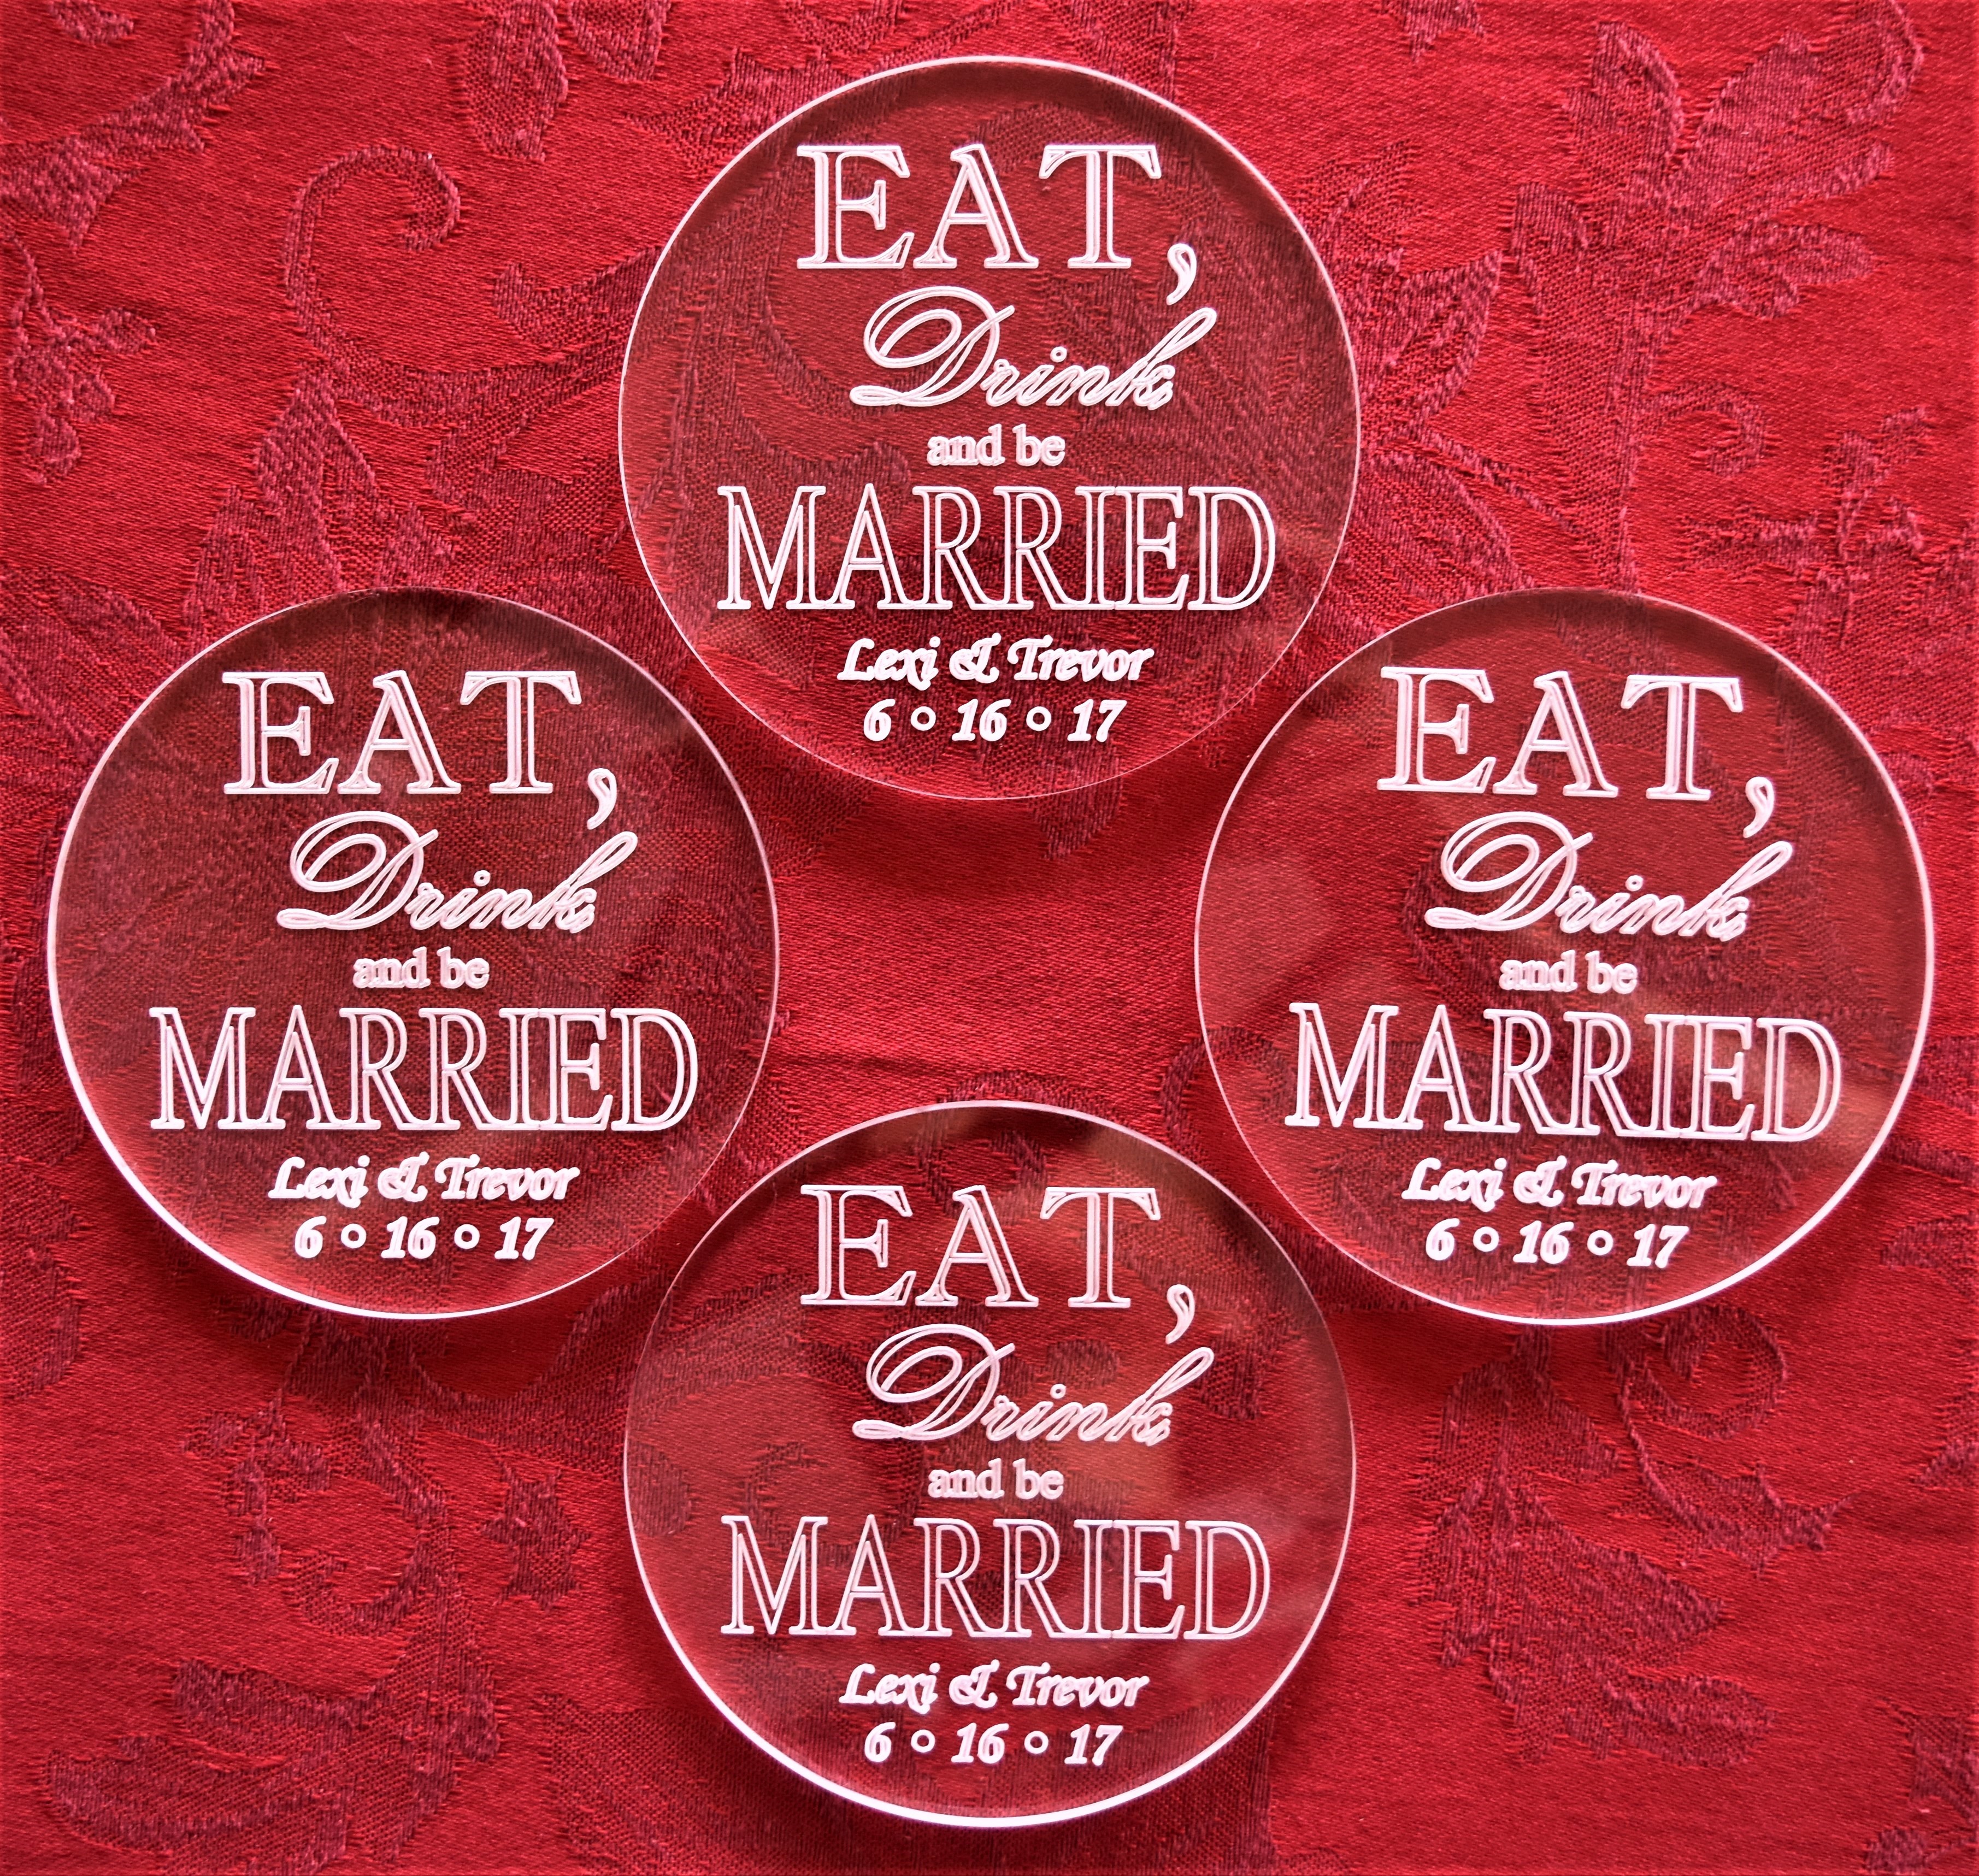 Personalized Acrylic Coasters (set of 4 shown)